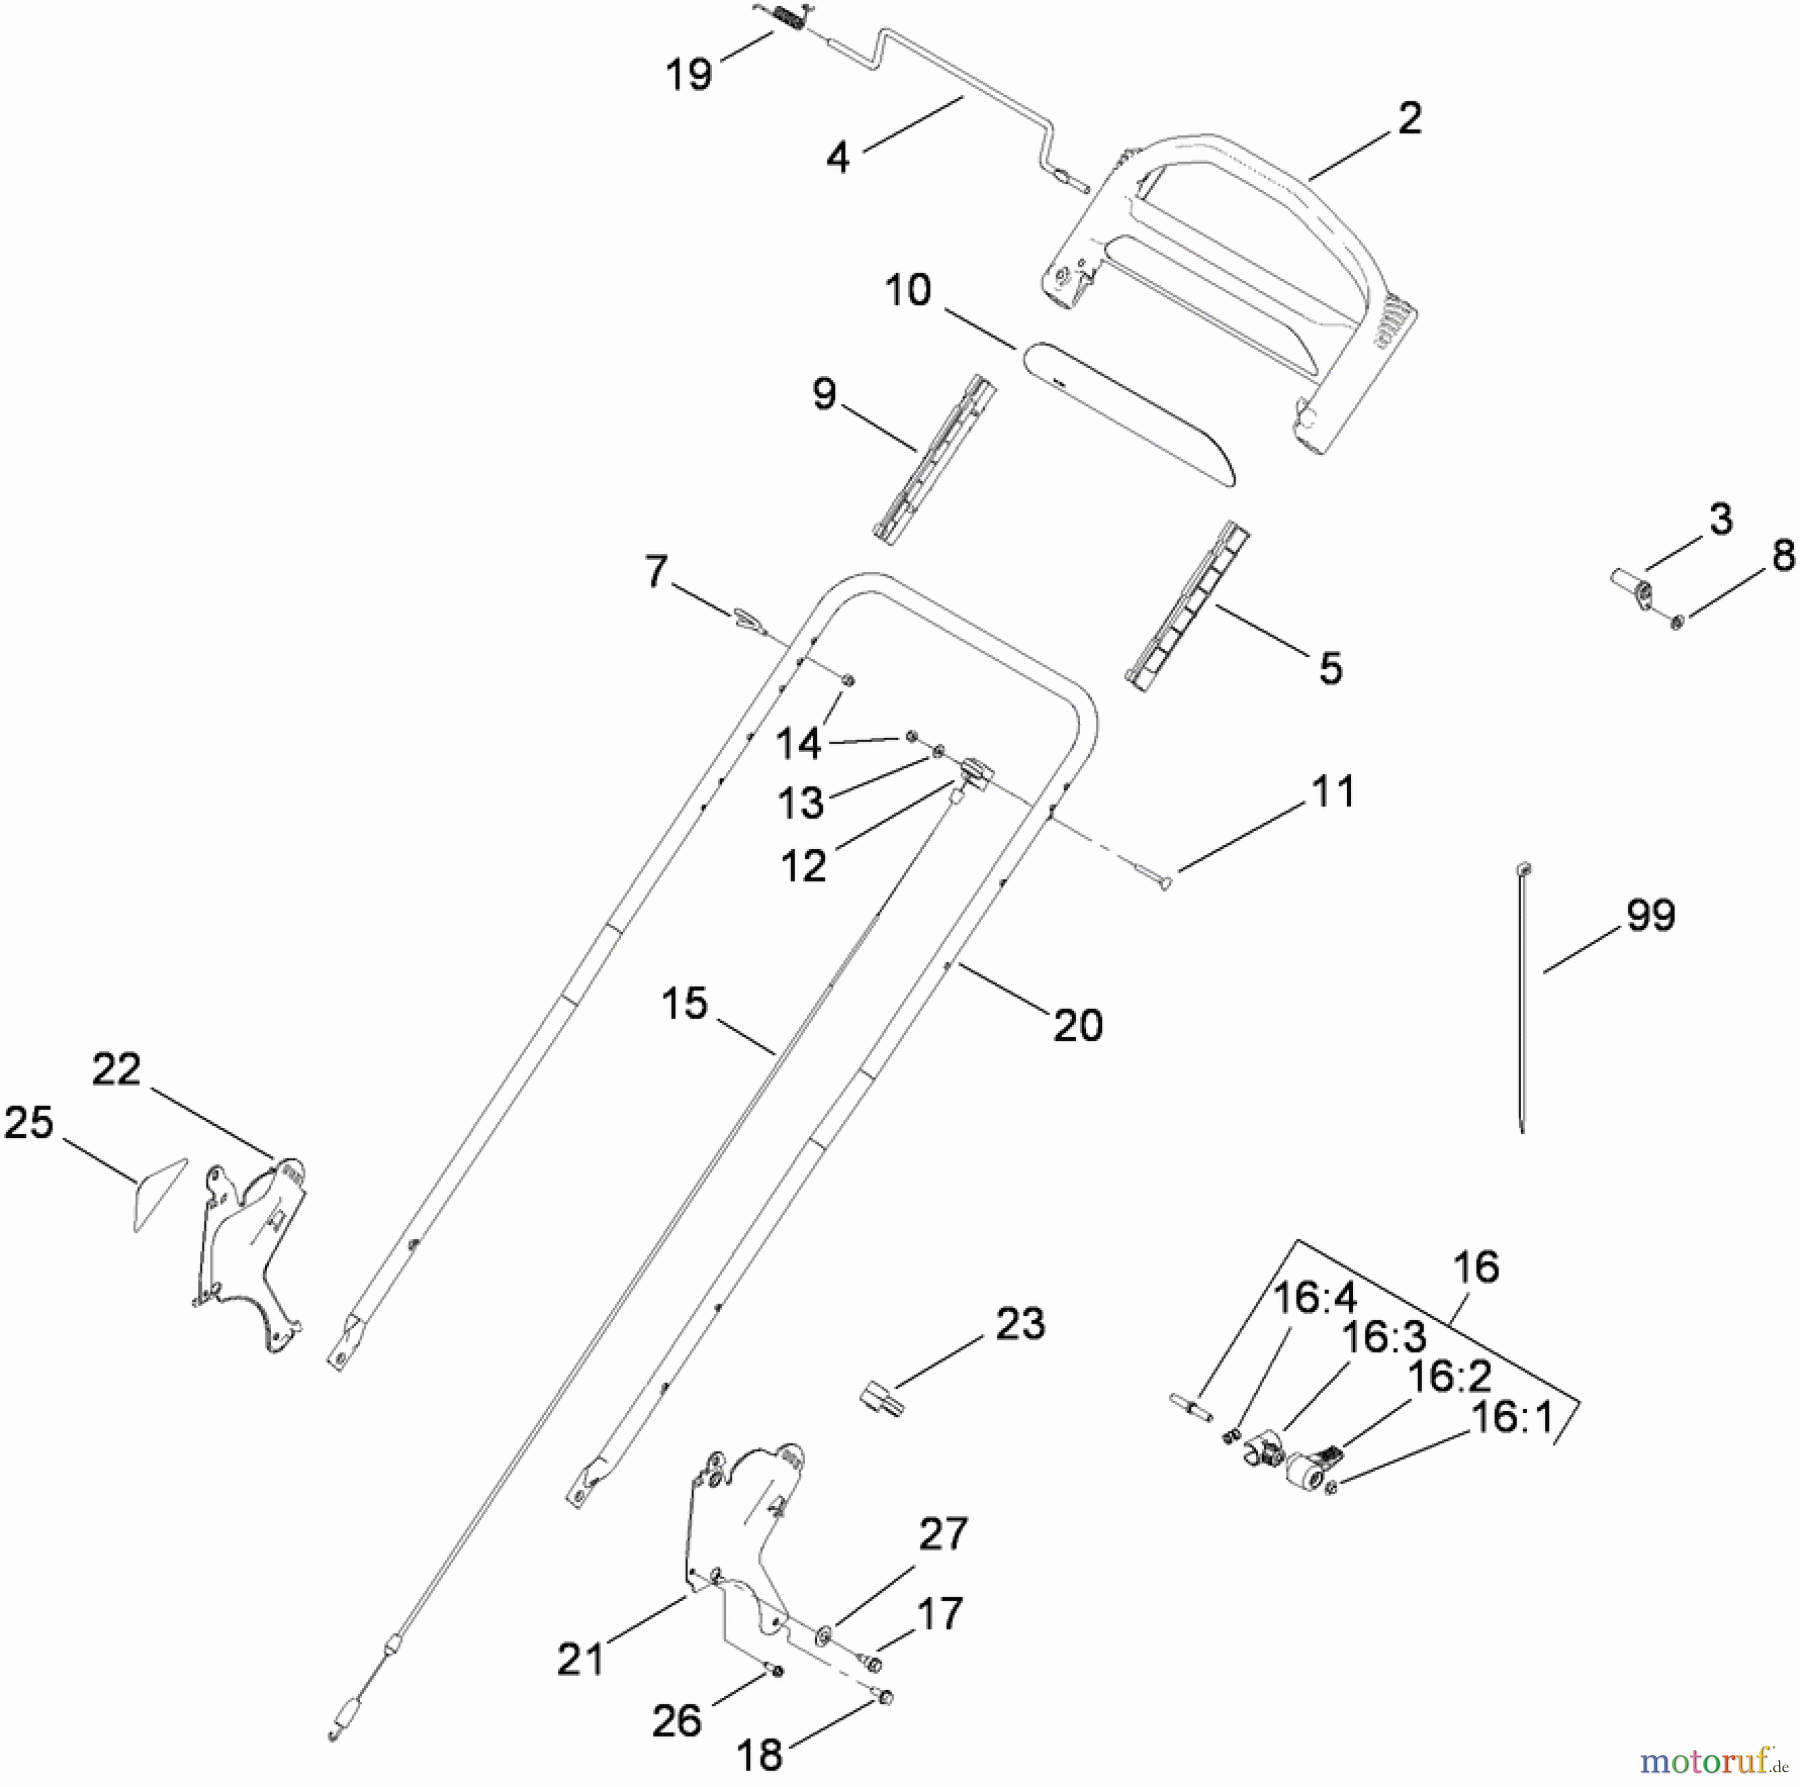  Toro Neu Mowers, Walk-Behind Seite 1 20093 - Toro Super Recycler Lawn Mower, 2009 (290000001-290999999) HANDLE AND CONTROL ASSEMBLY